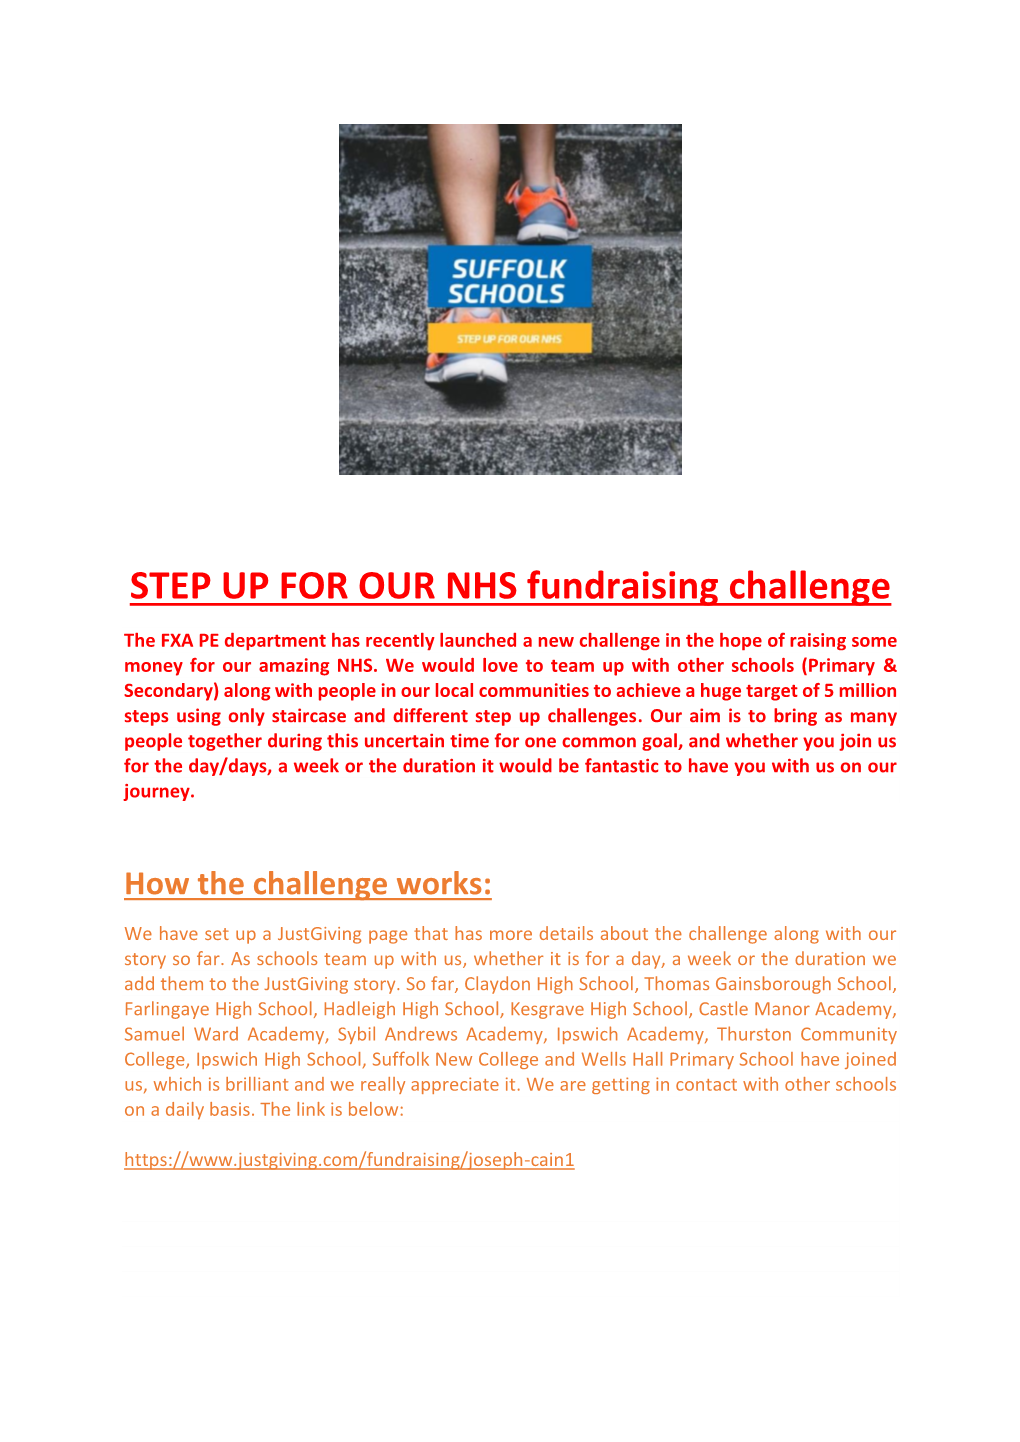 STEP up for OUR NHS Fundraising Challenge